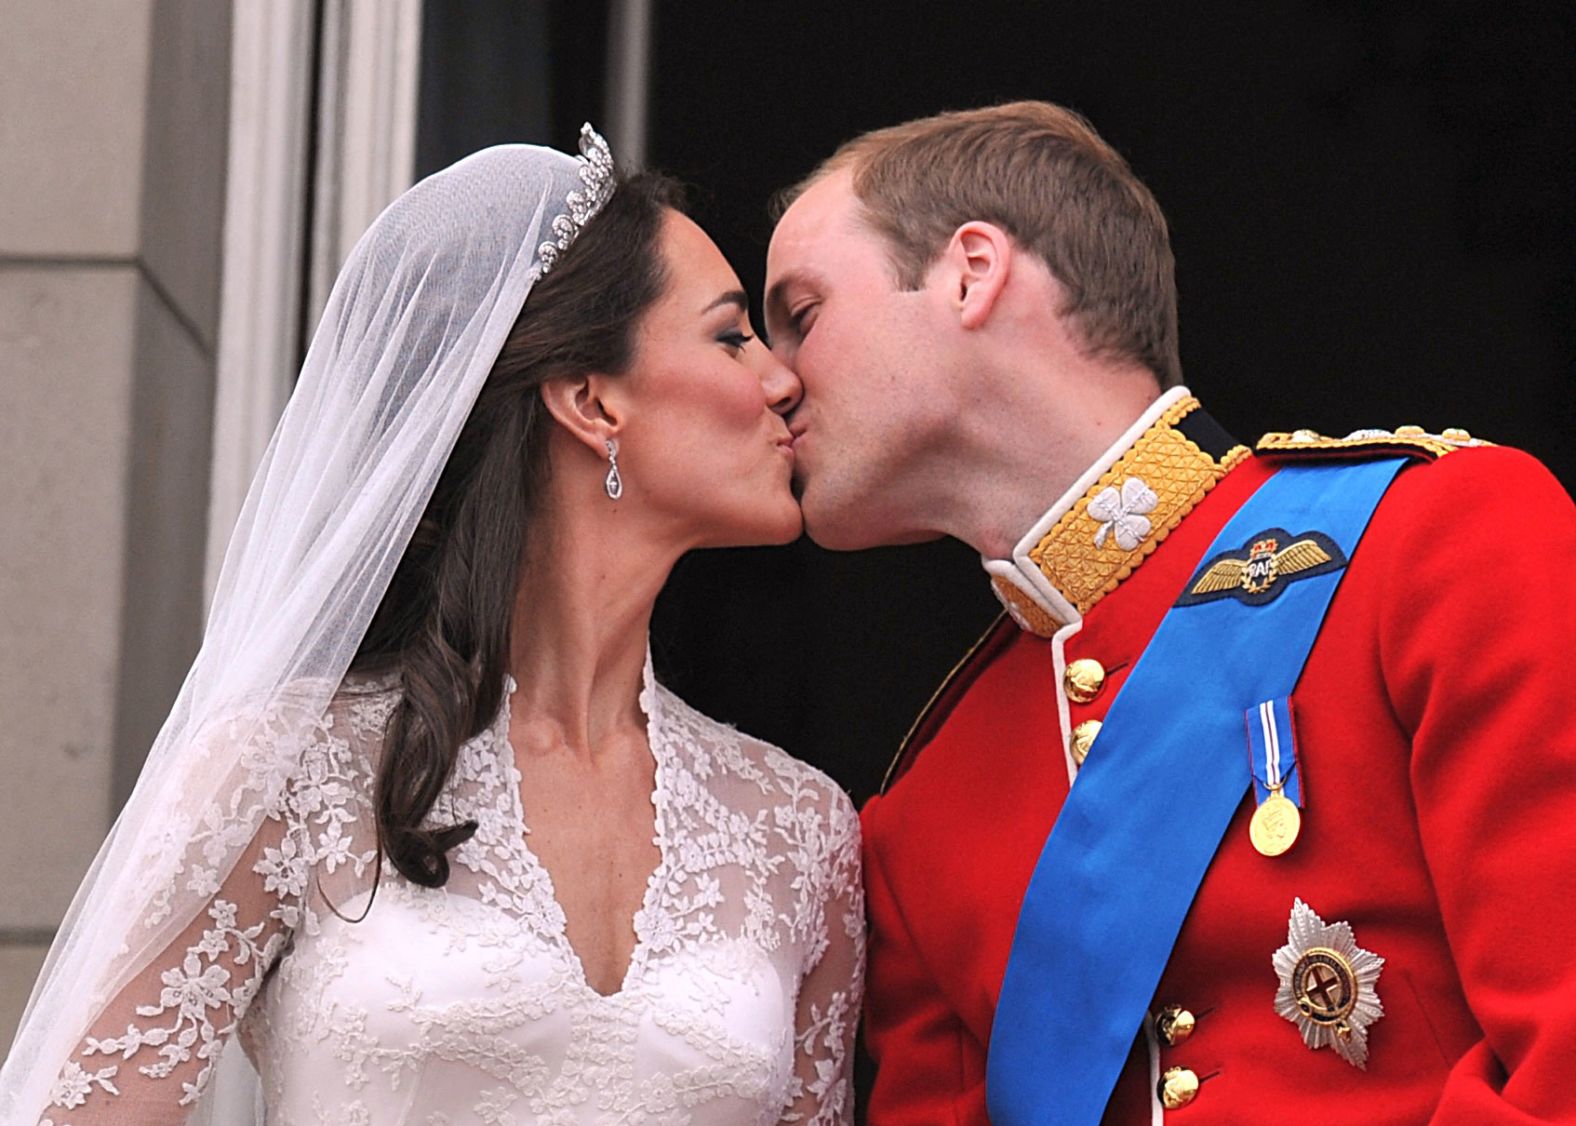 William and Kate kiss on the balcony of Buckingham Palace on their wedding day.